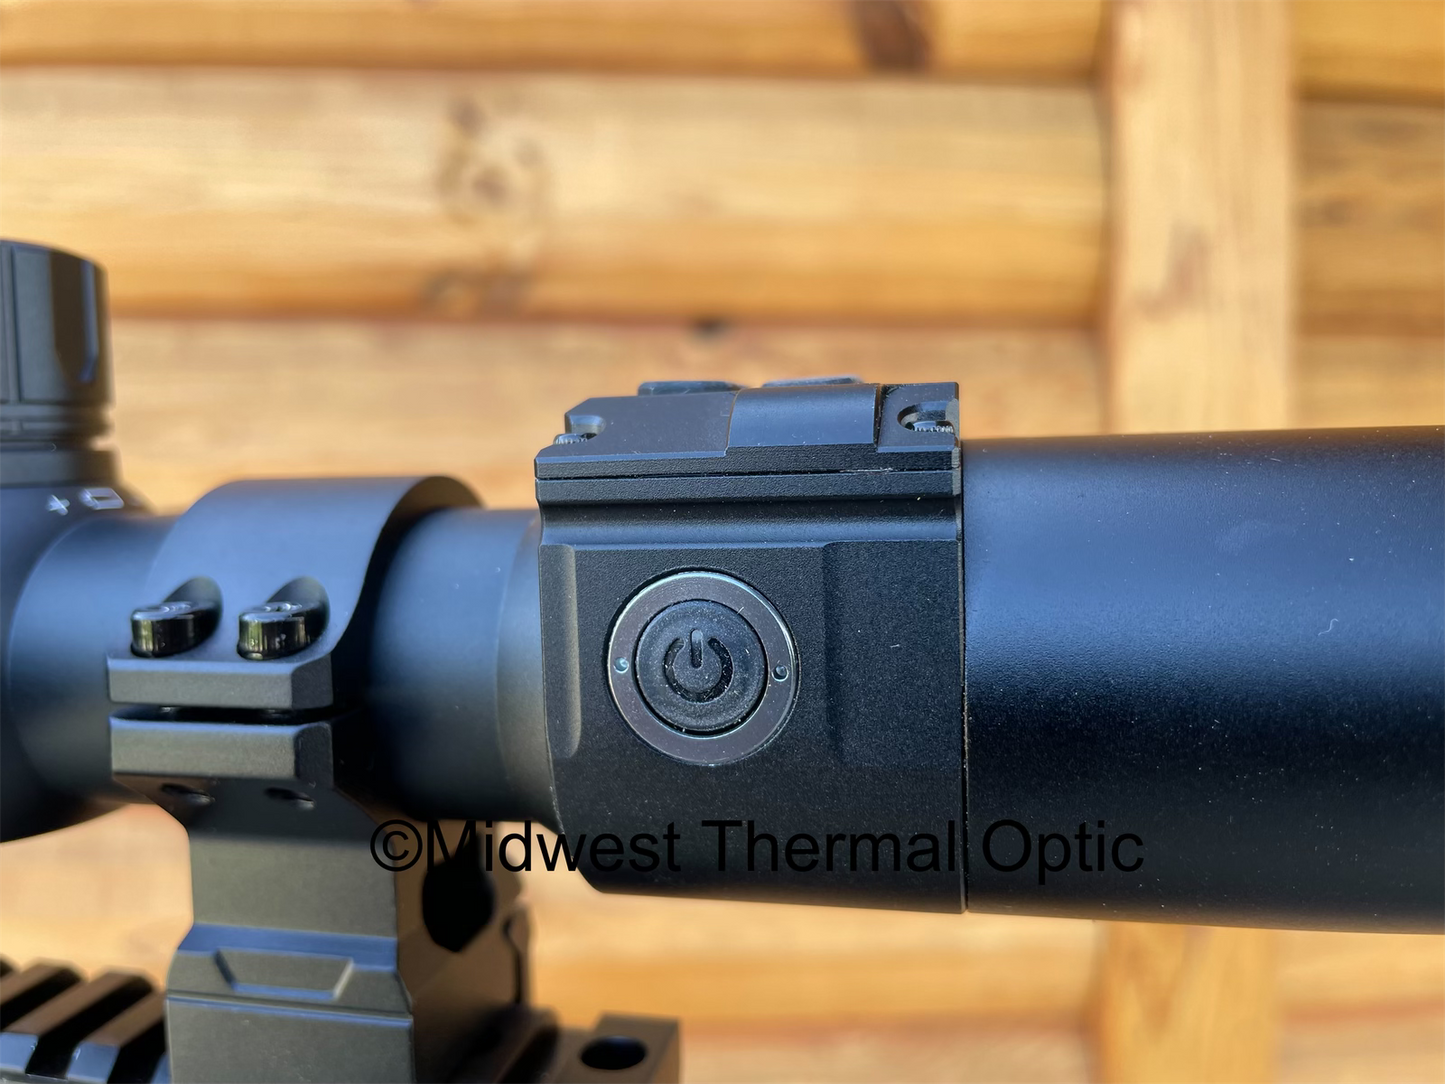 SALE DEMO Pard Thermal Scope TS36-45LRF 640 With LRF